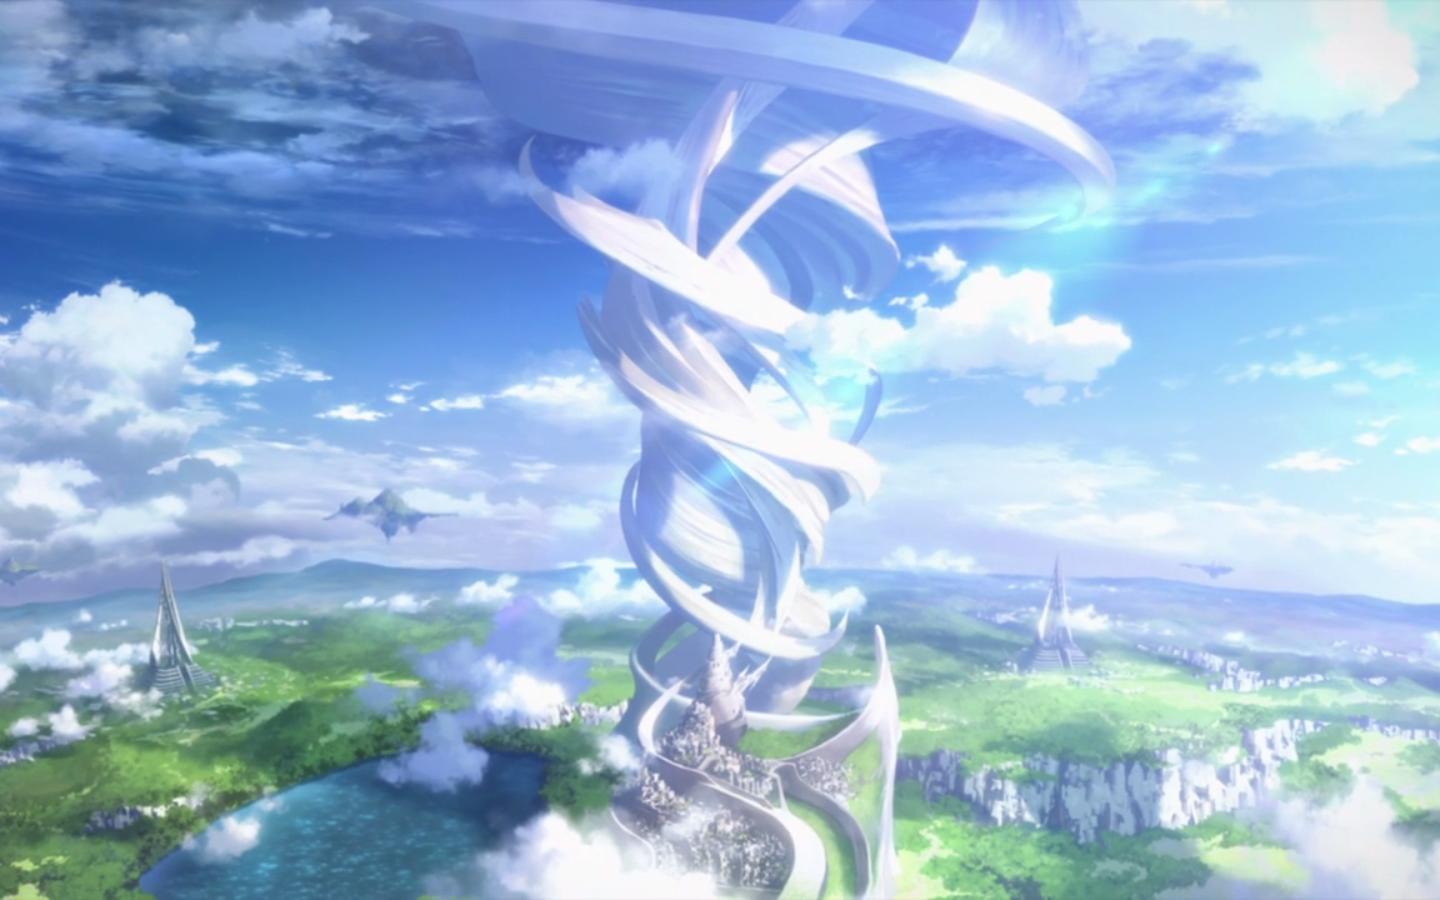 Sao world tree   123766   High Quality and Resolution Wallpapers on 1440x900